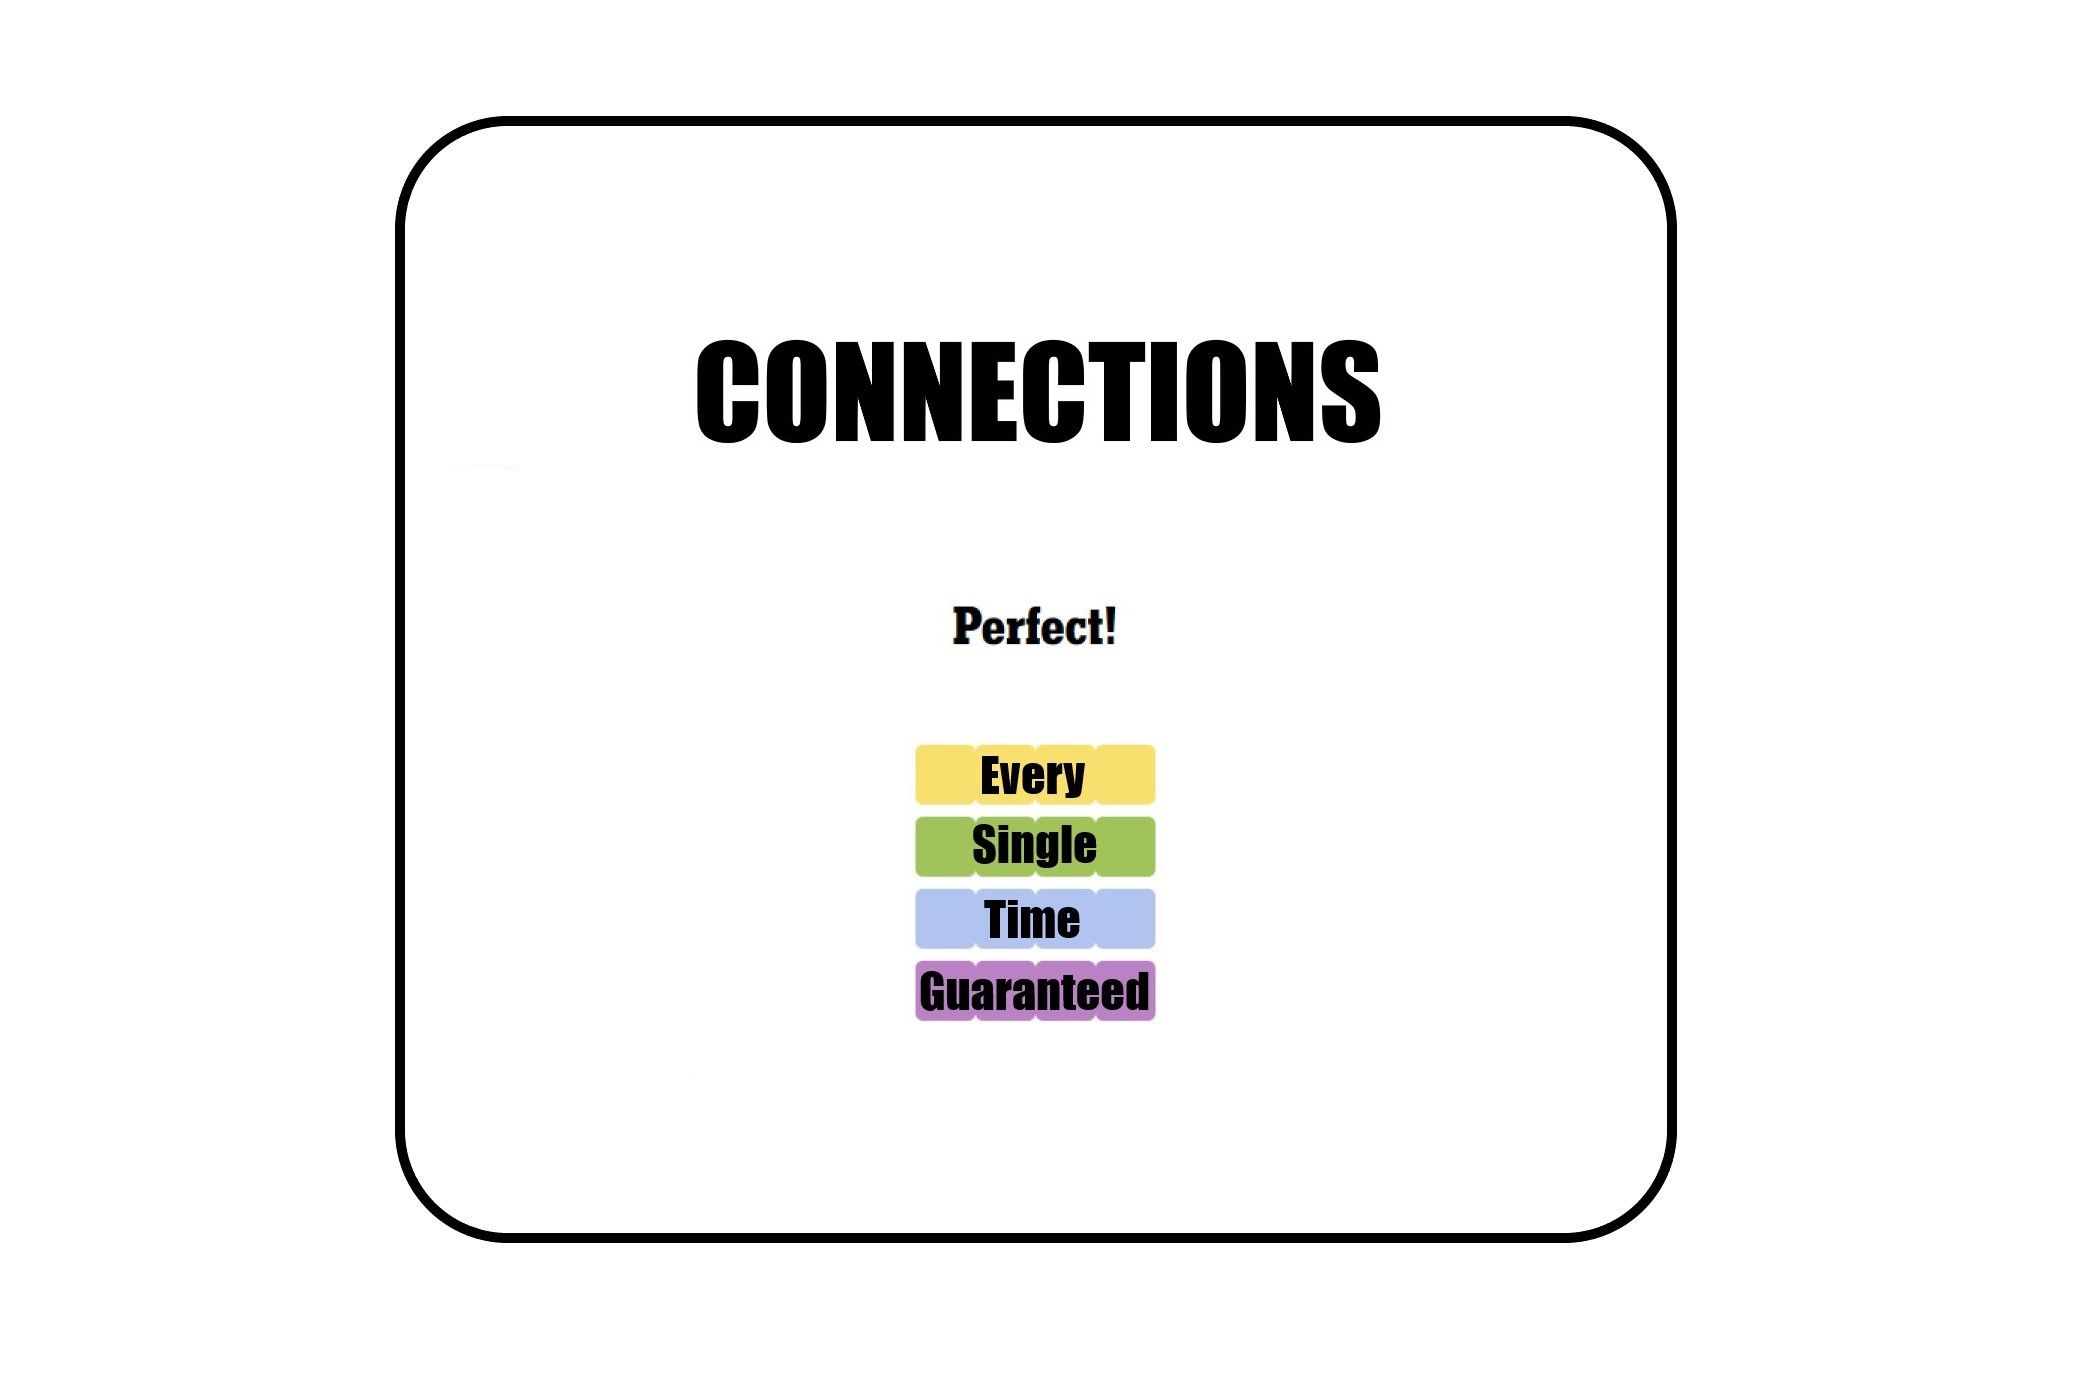 An edited version of the Connections screen when you complete the daily word game